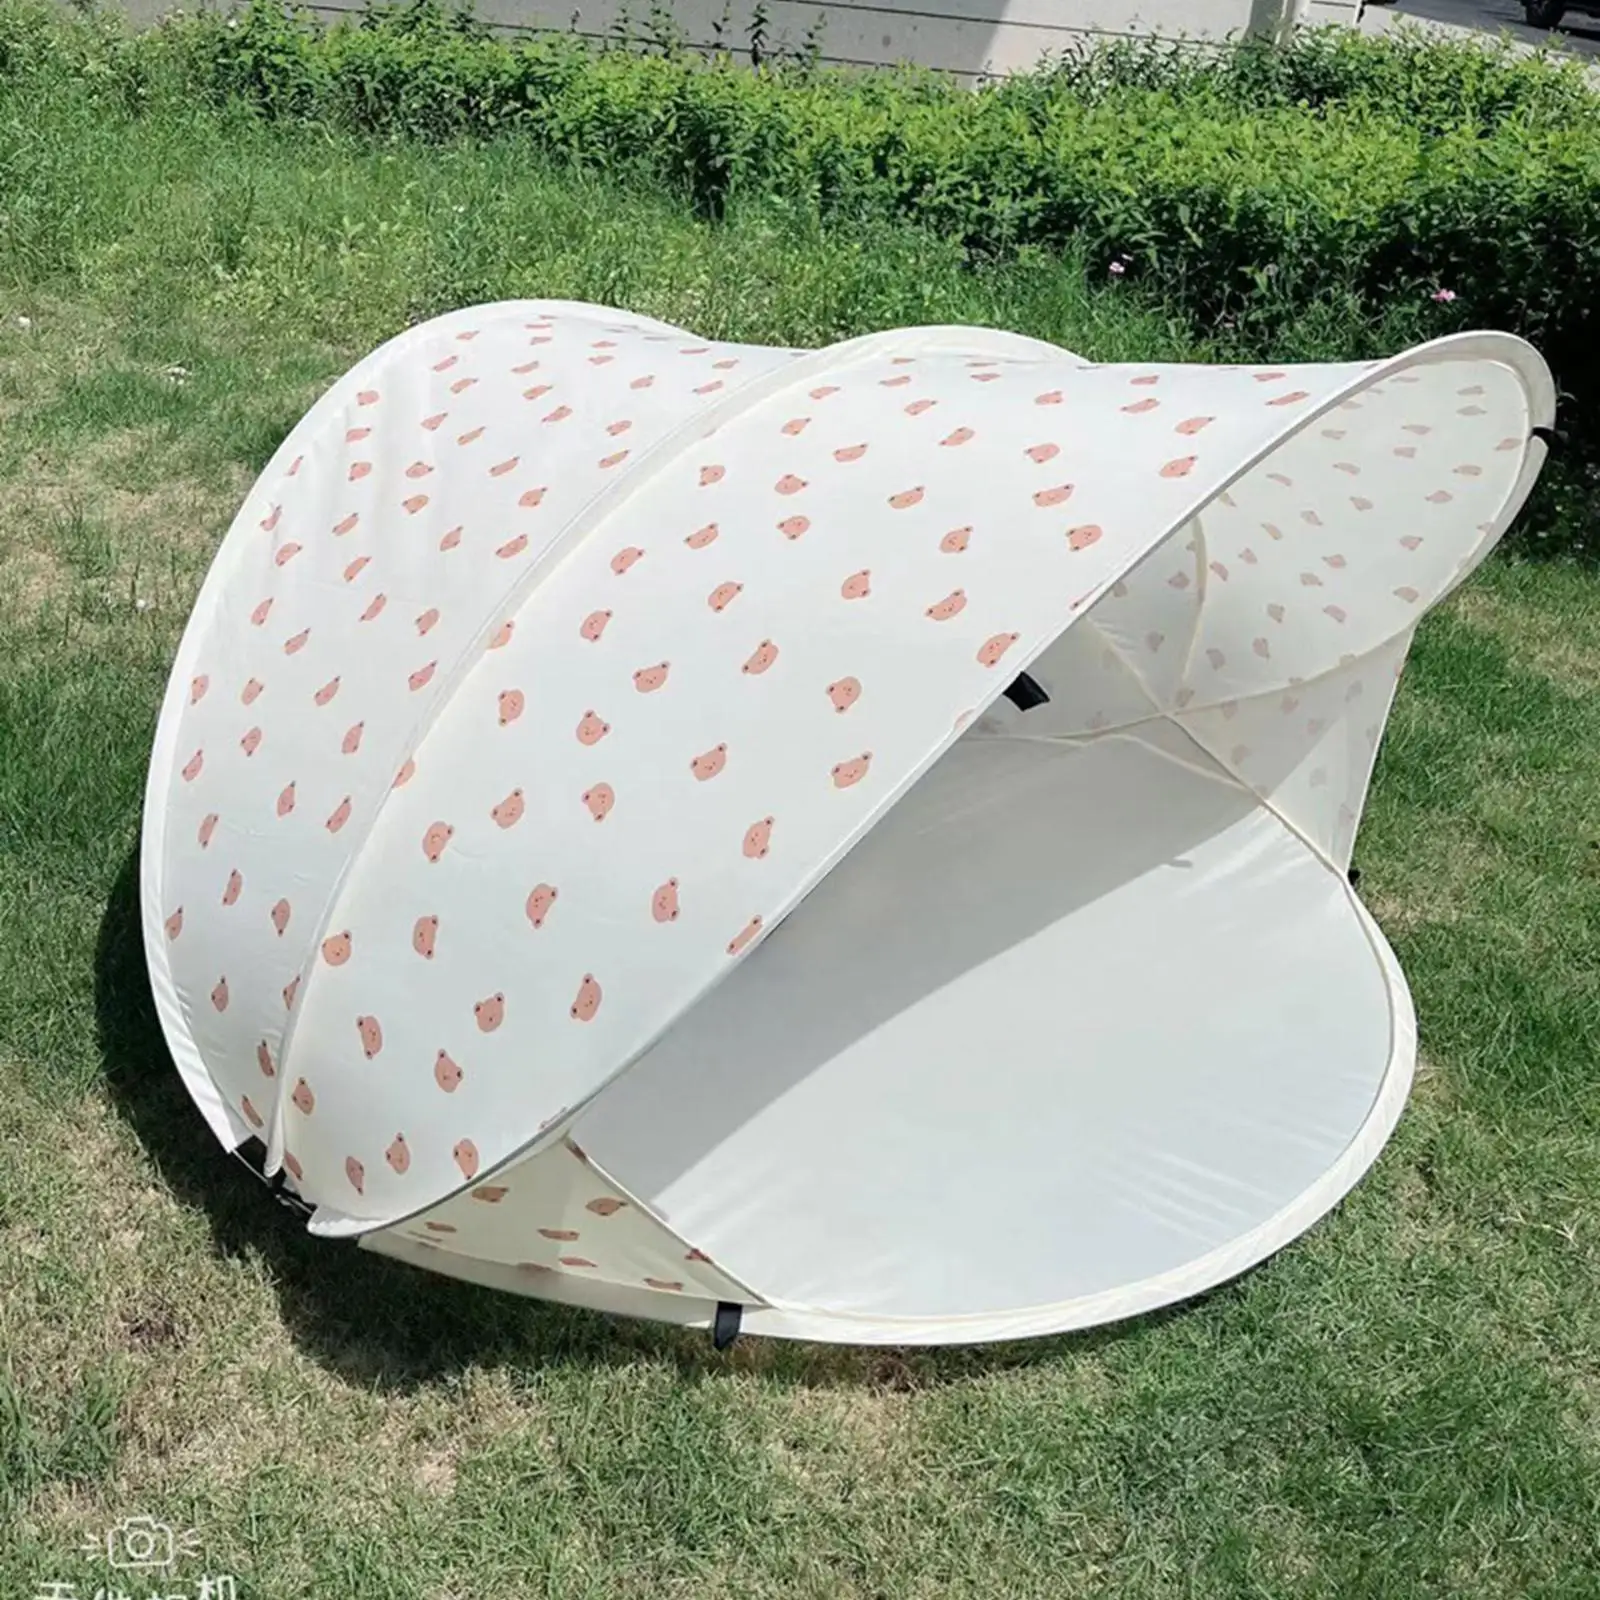 Beach Tent Baby Travel Tent Easy Setup Breathable Camping Playground Outdoor Toys Kids Play Tent for Children Picnic Backyard 